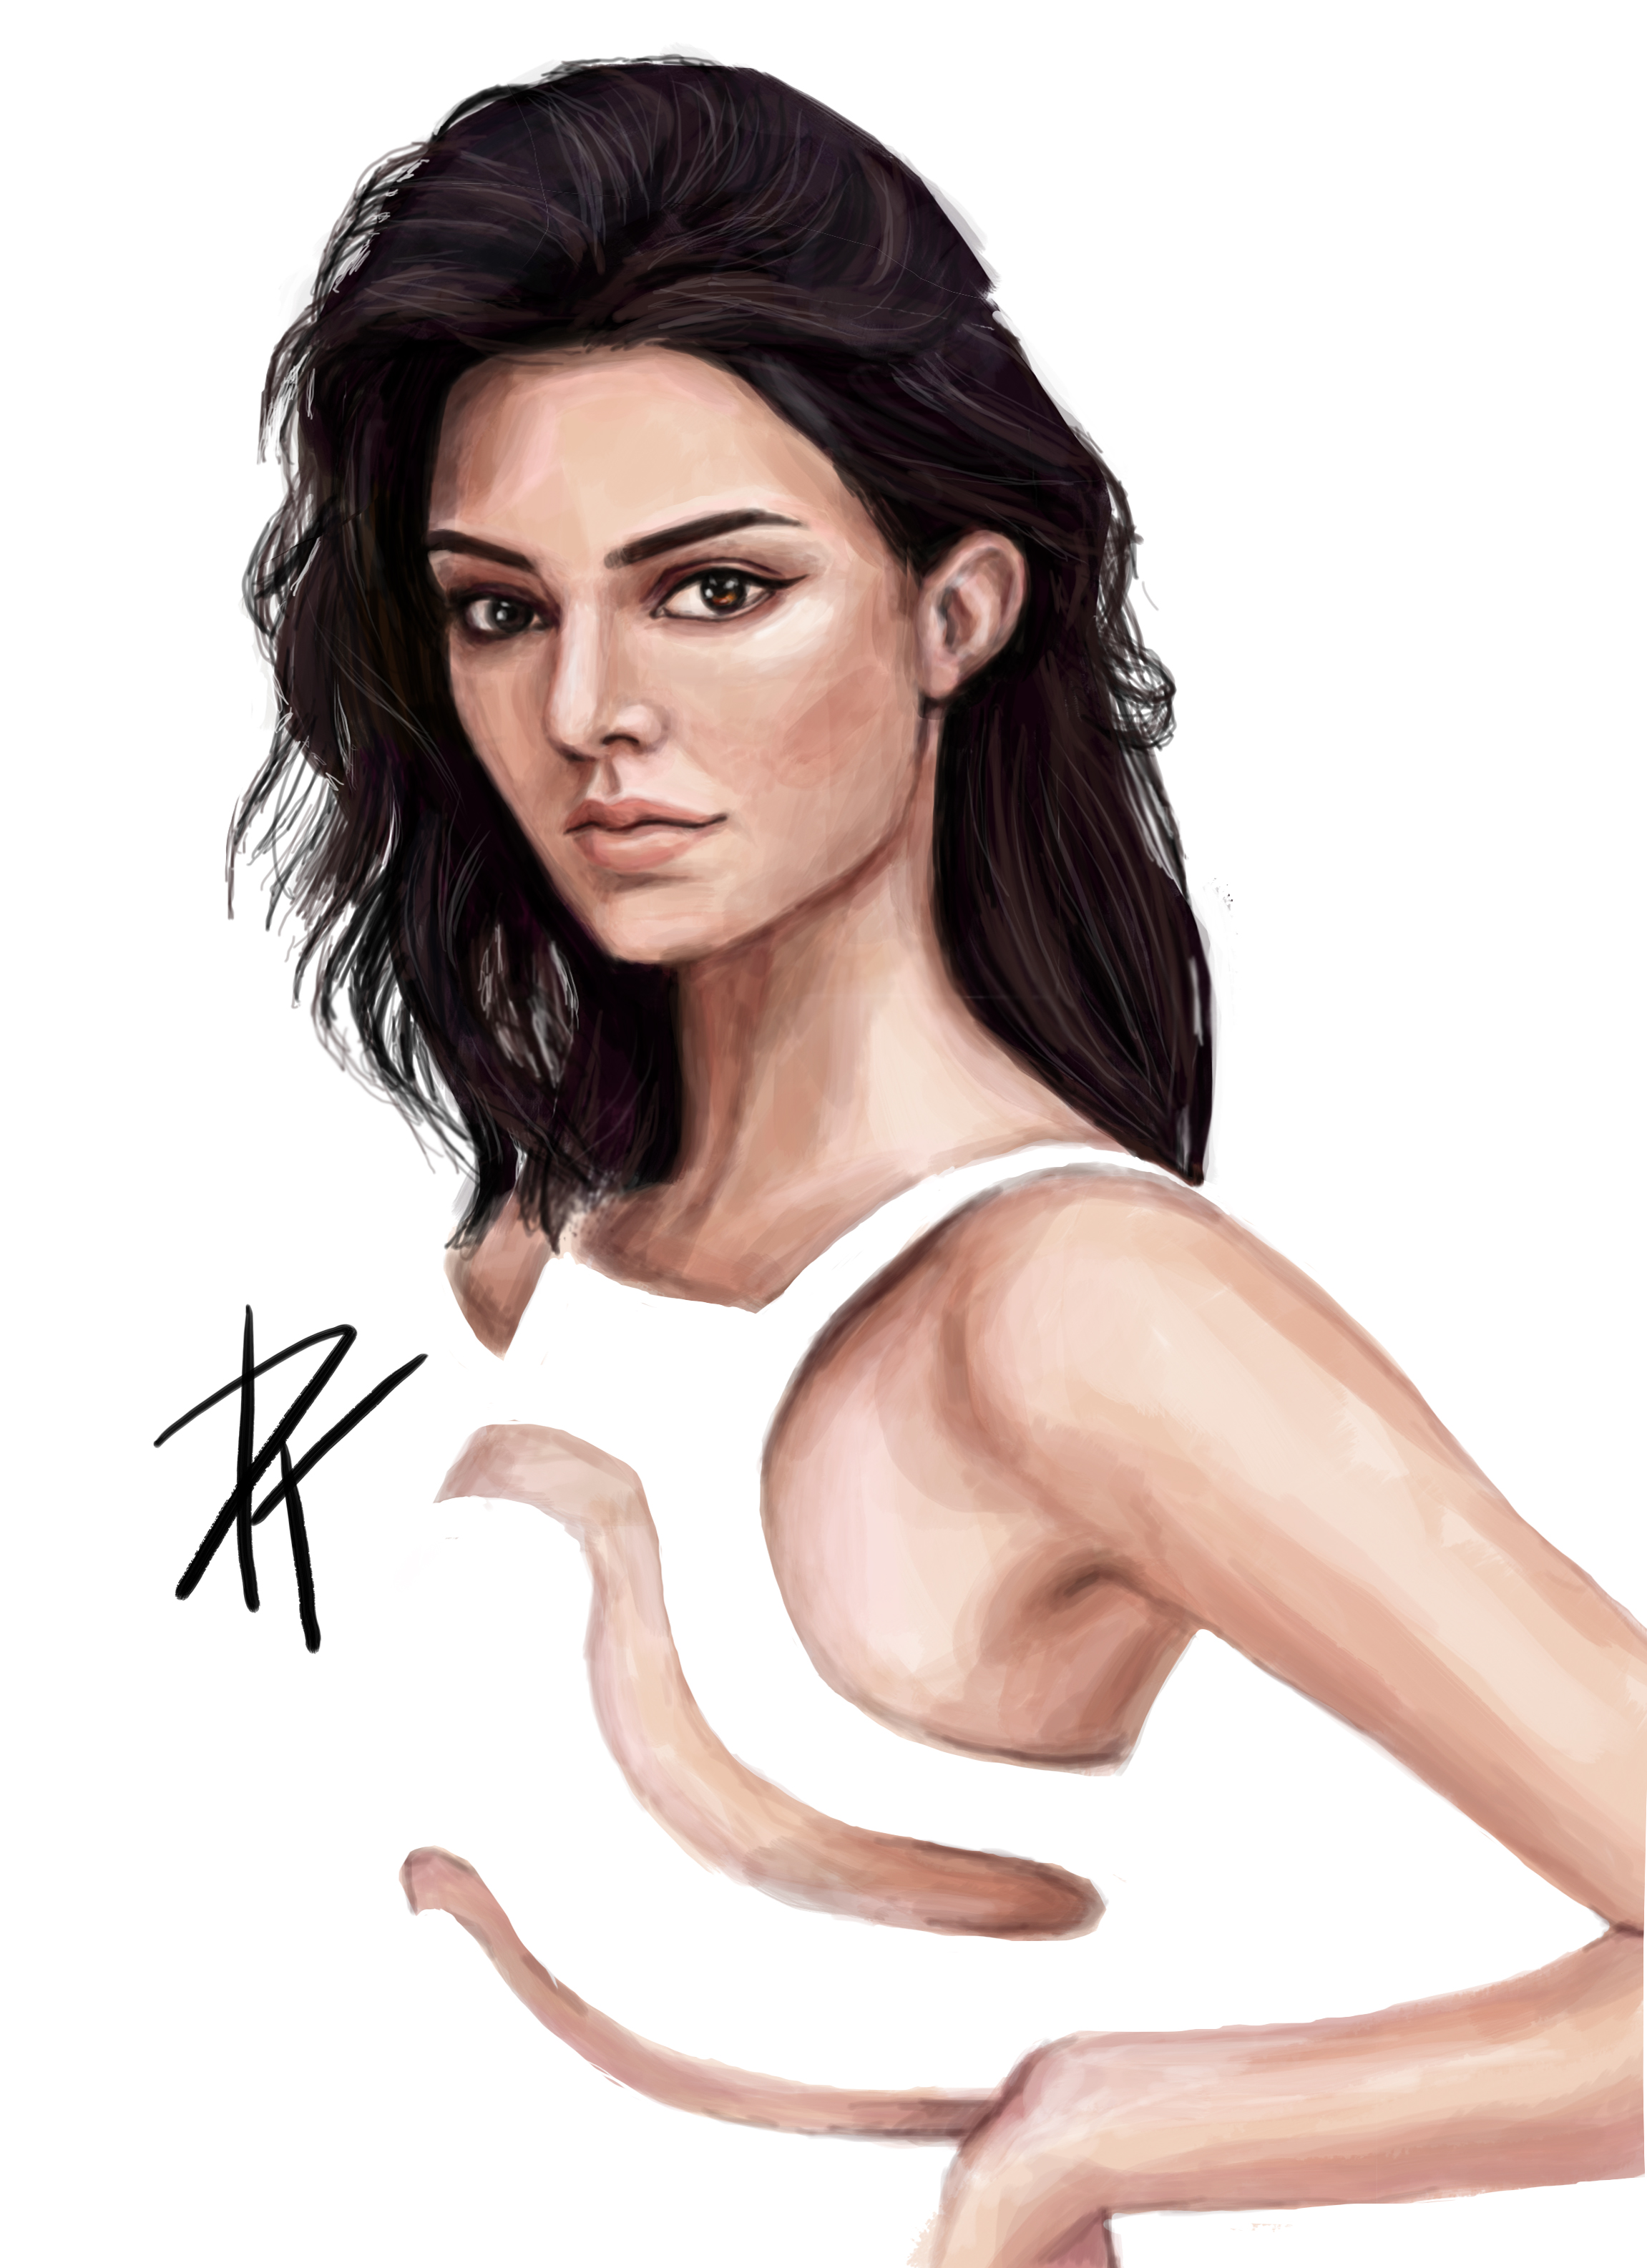 KENDALL